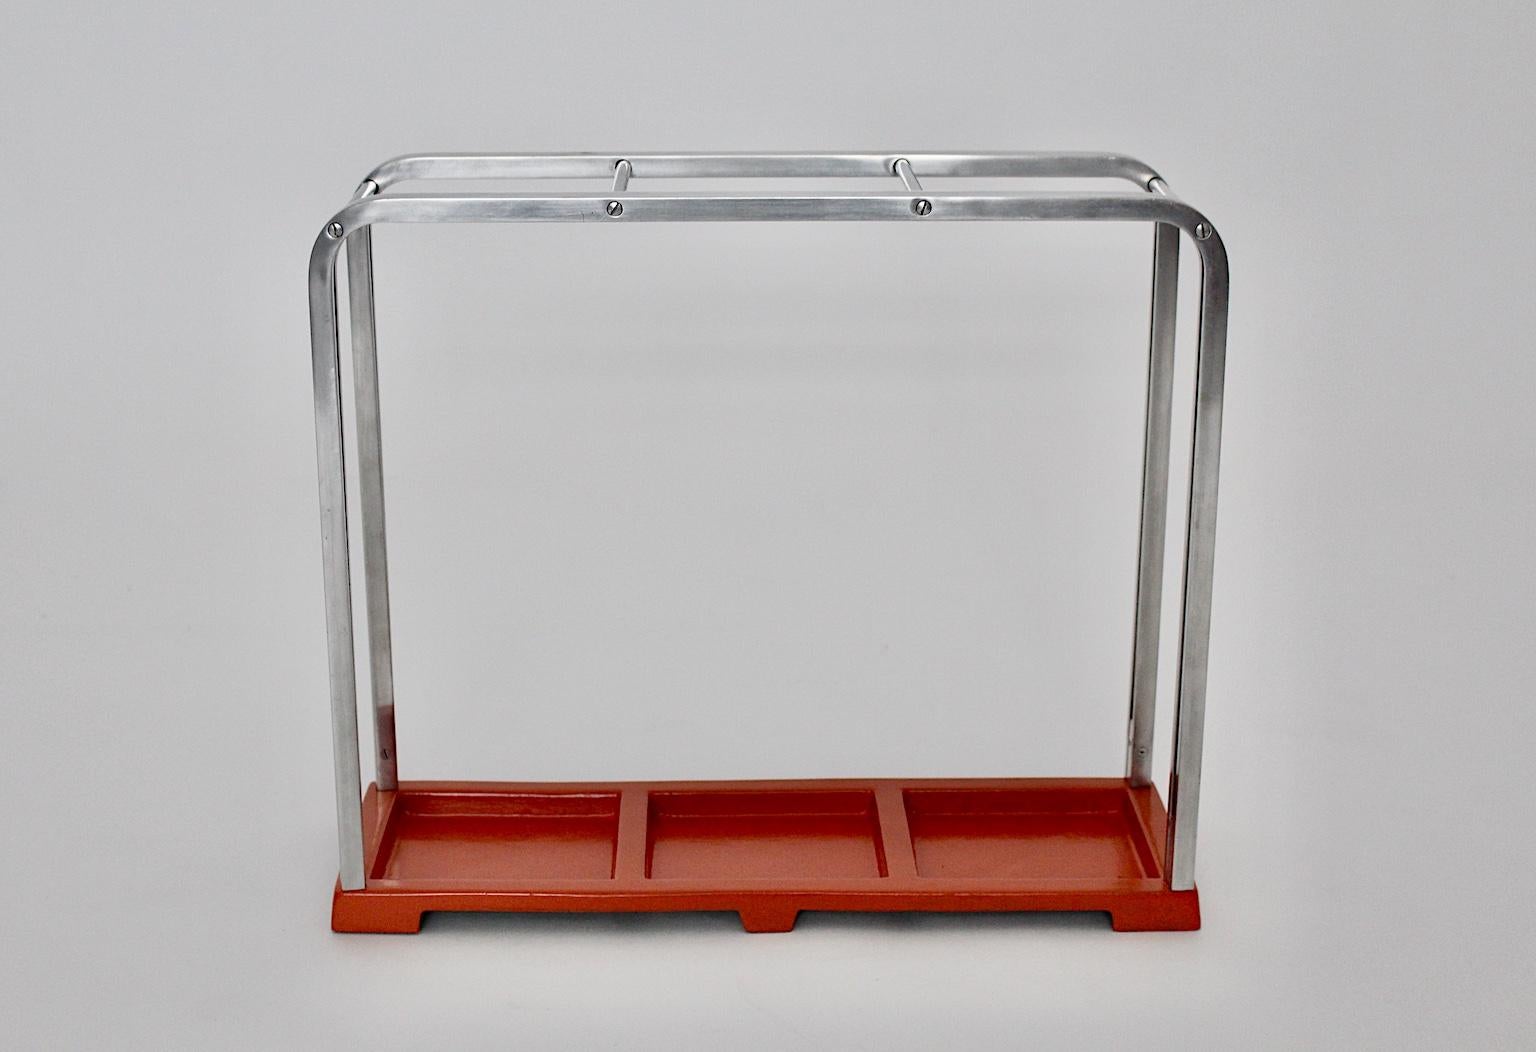 Bauhaus Art Deco Vintage Red Silver Aluminum Umbrella Stand, 1930s, Germany For Sale 6